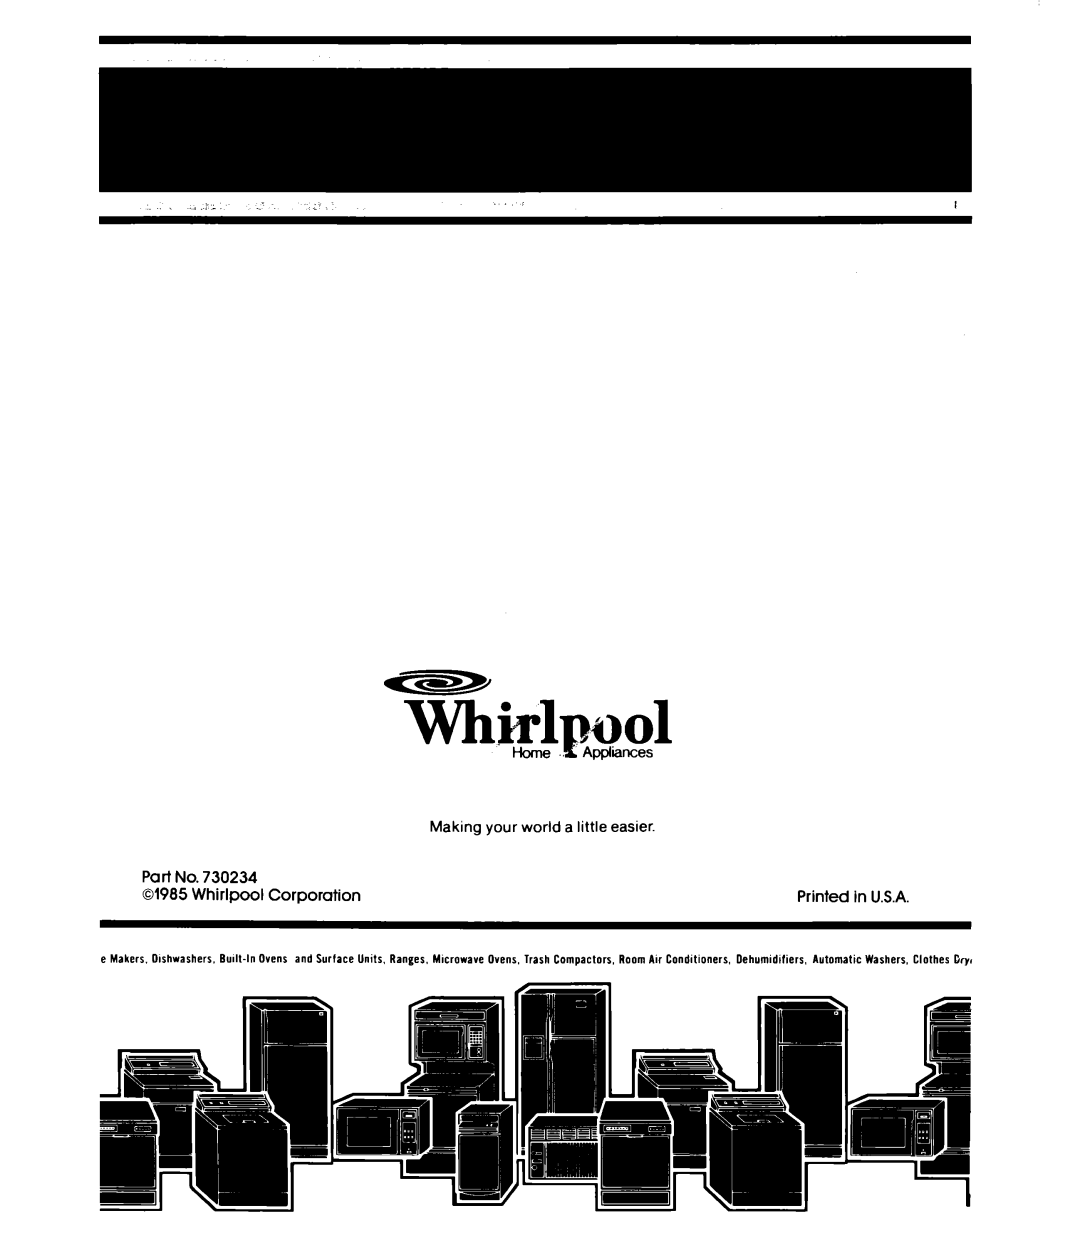 Whirlpool EV090F manual Tbi+dHome.,Appliances, Making your world a little easier, Whirlpool Corporation 